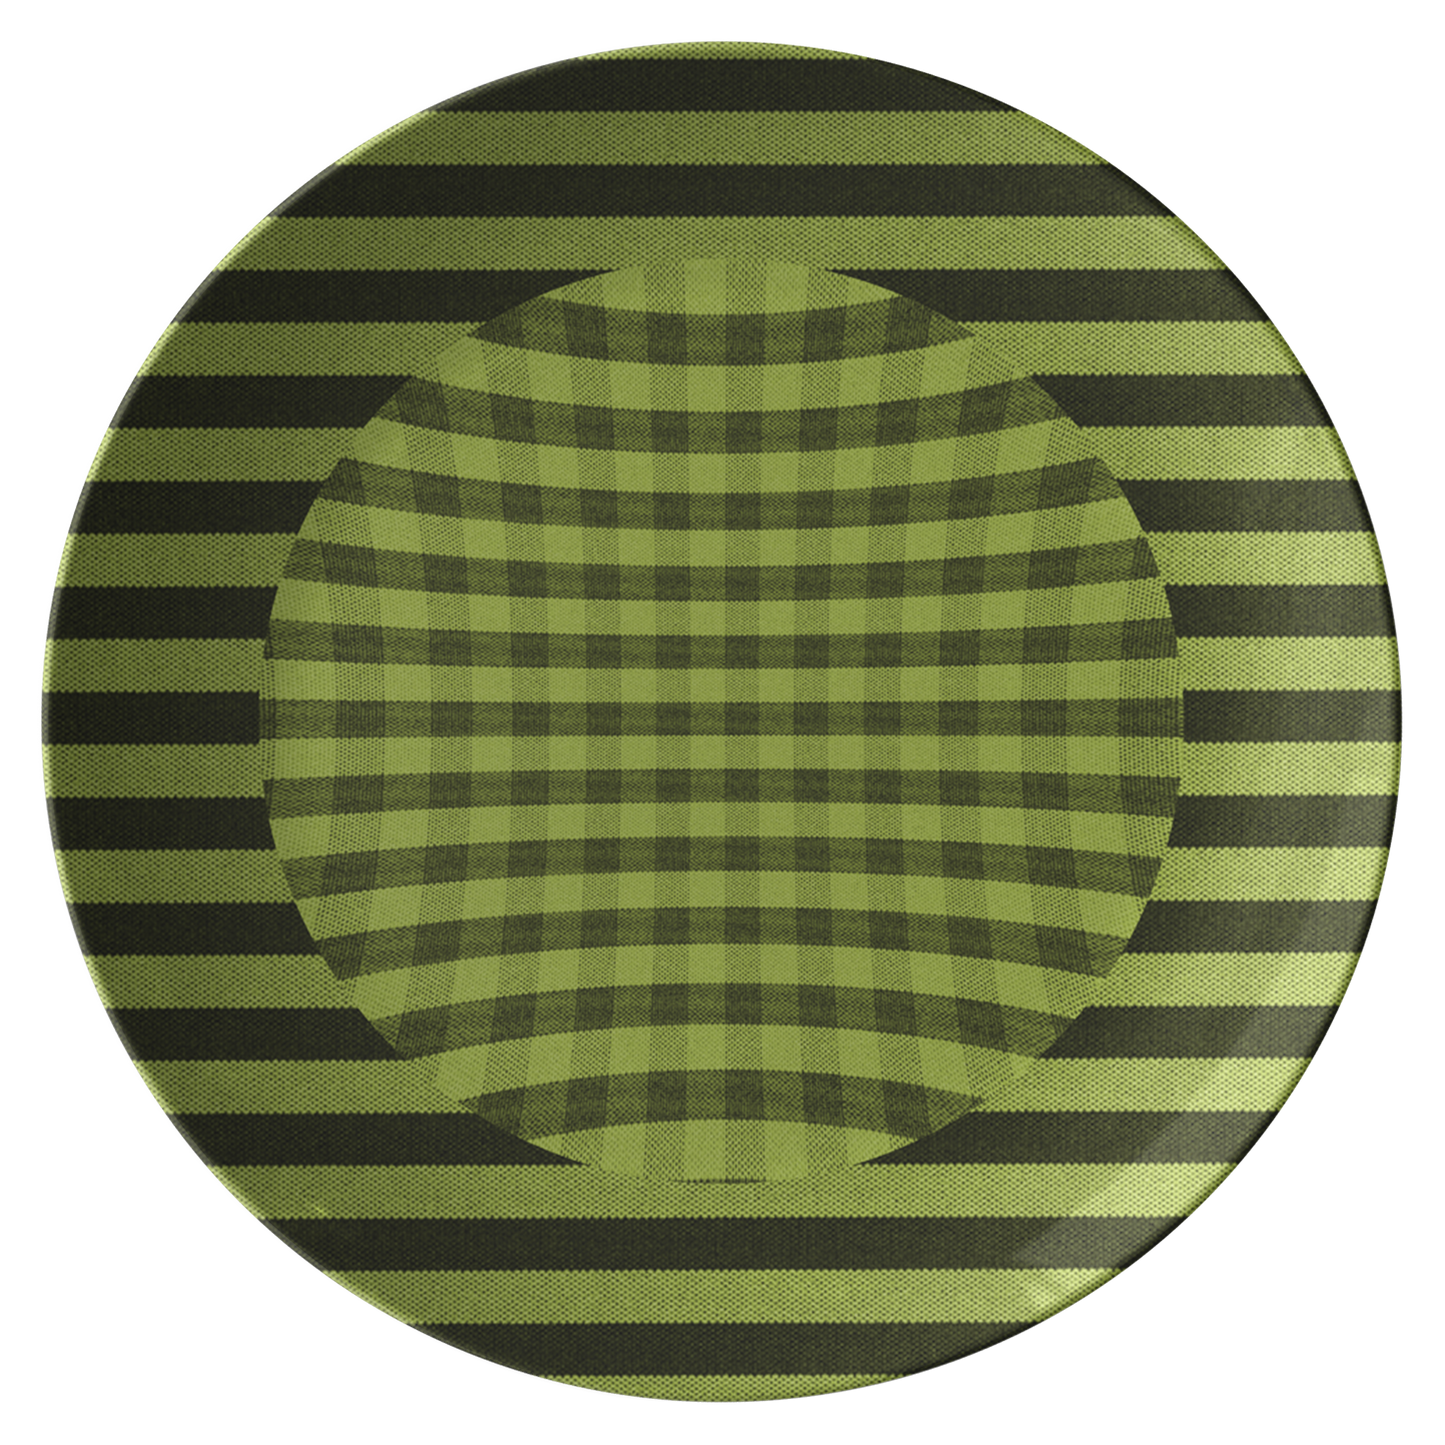 Chemise Lime Dinner Plate from Vluxe by Lucky Nahum